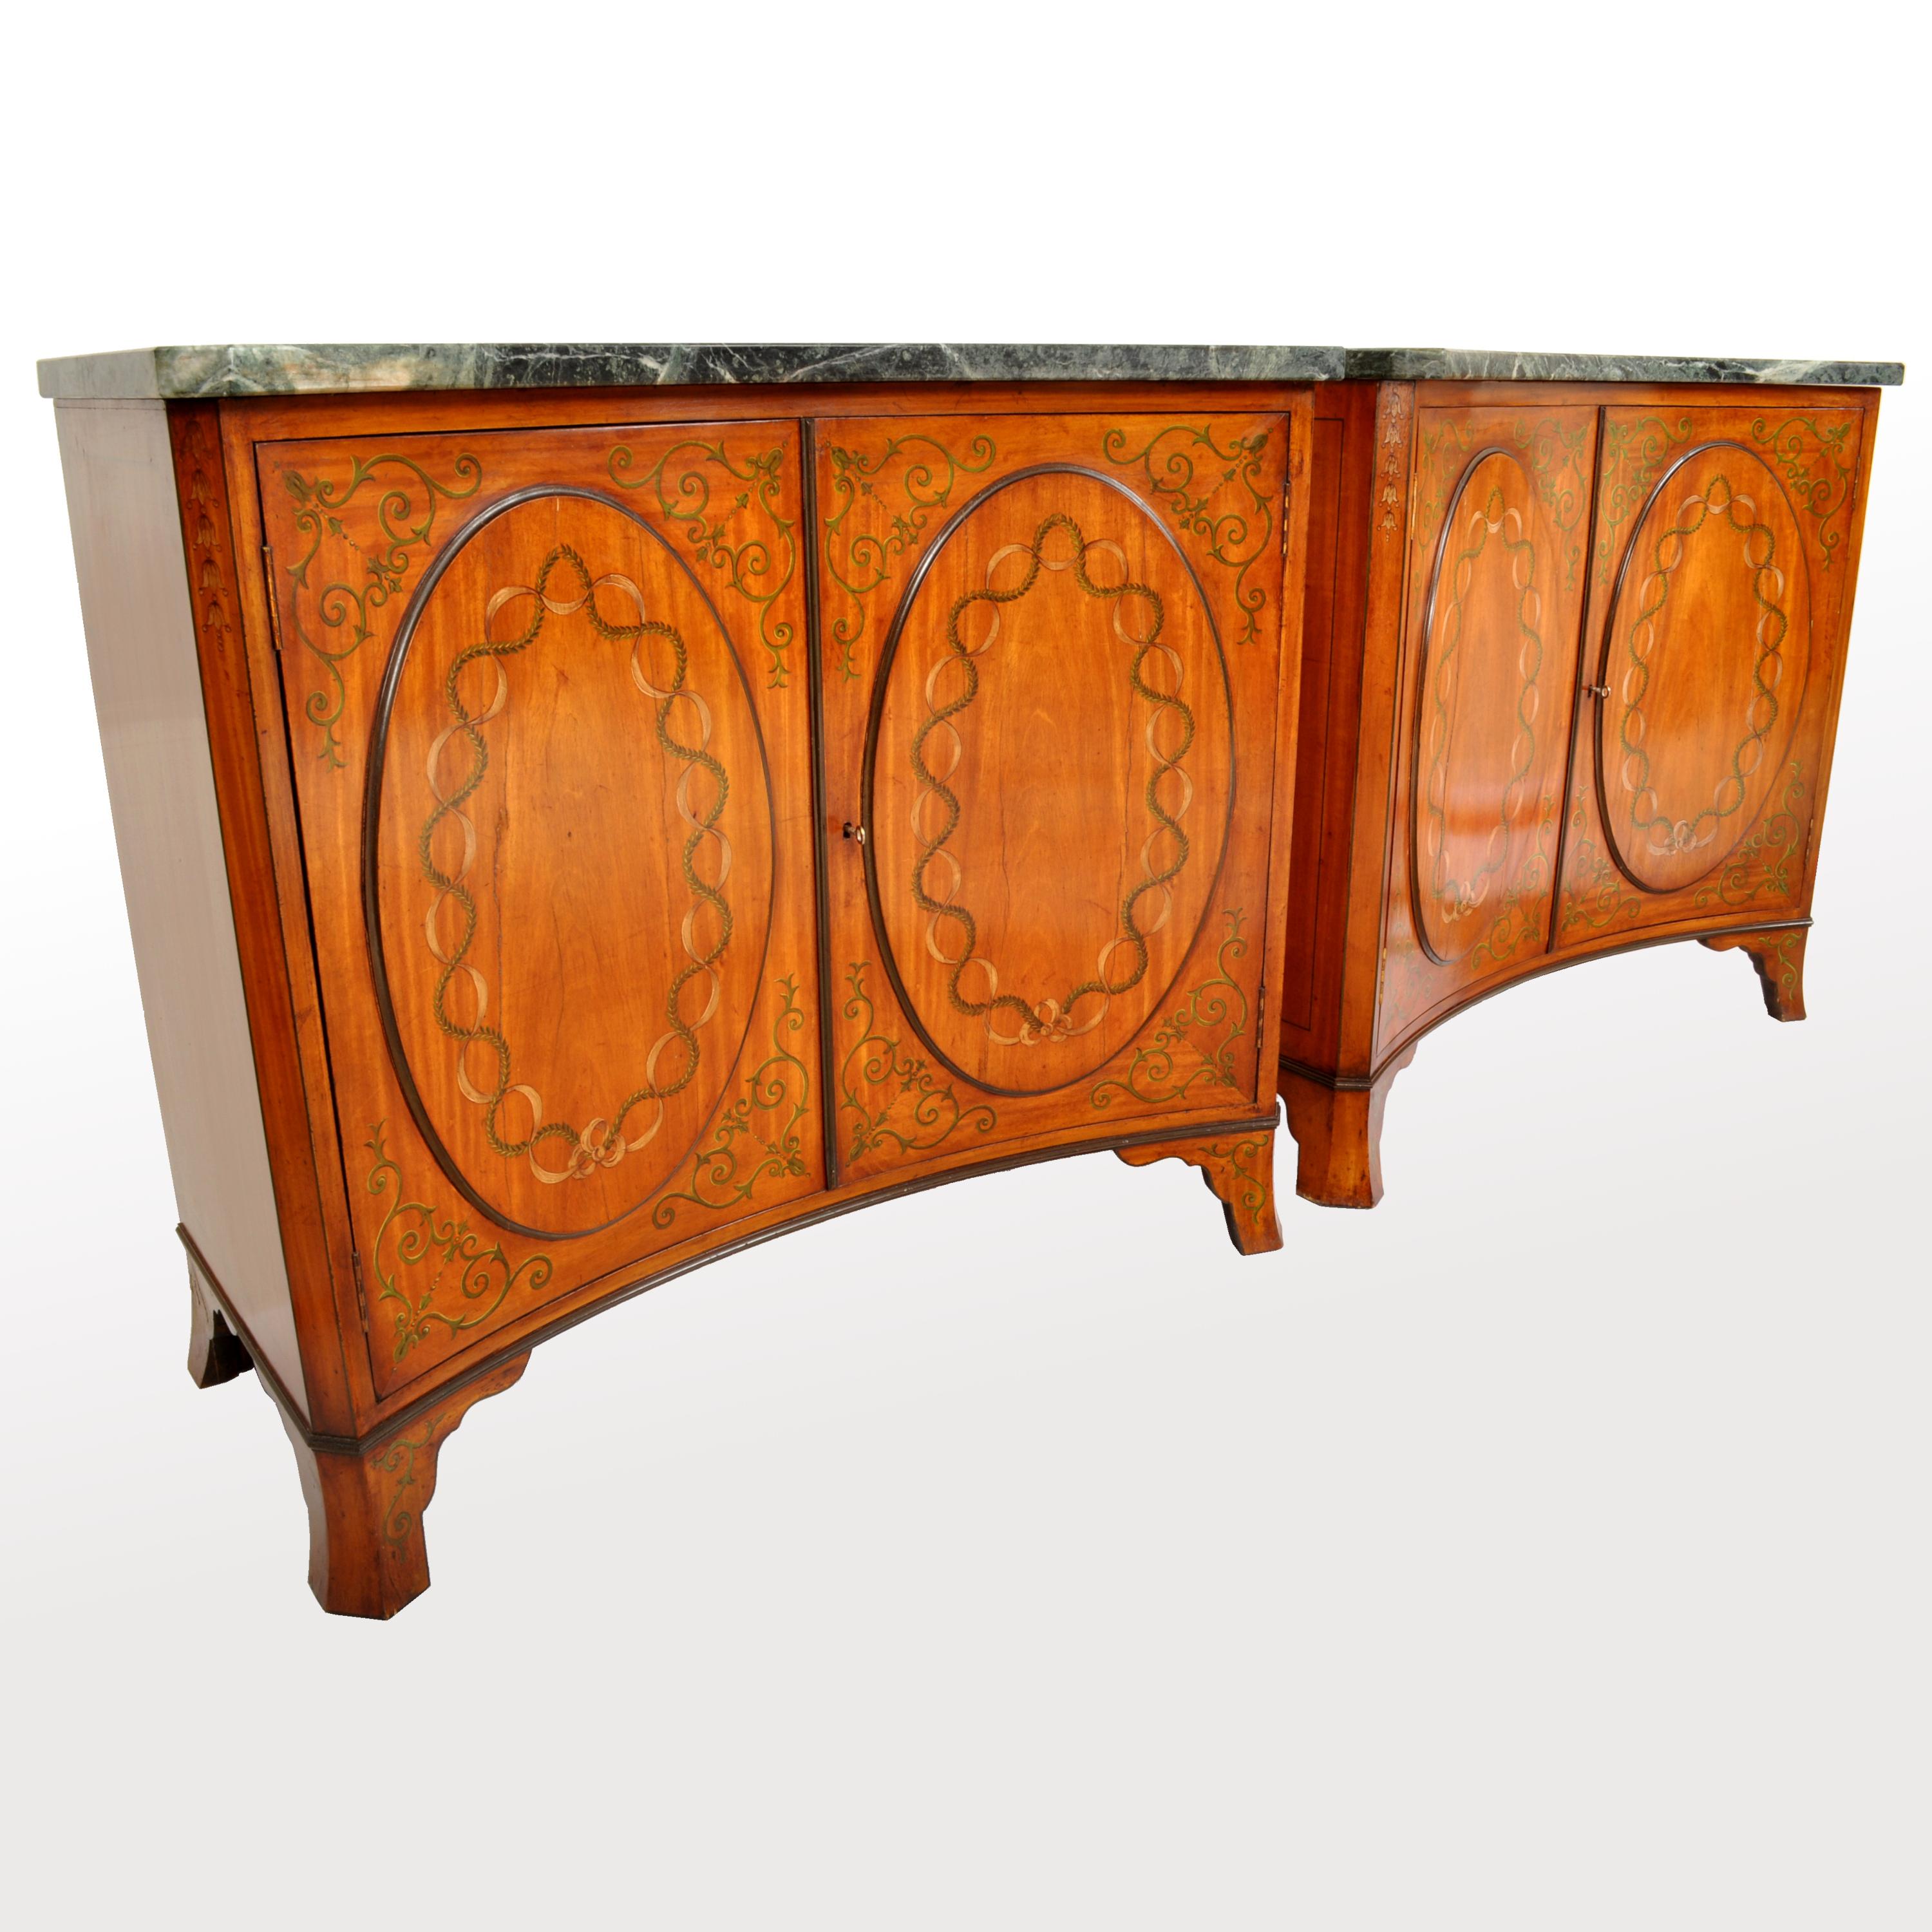 Adam Style Pair of Antique Marble Top Painted Adam Revival Satinwood Commodes Cabinets 1880